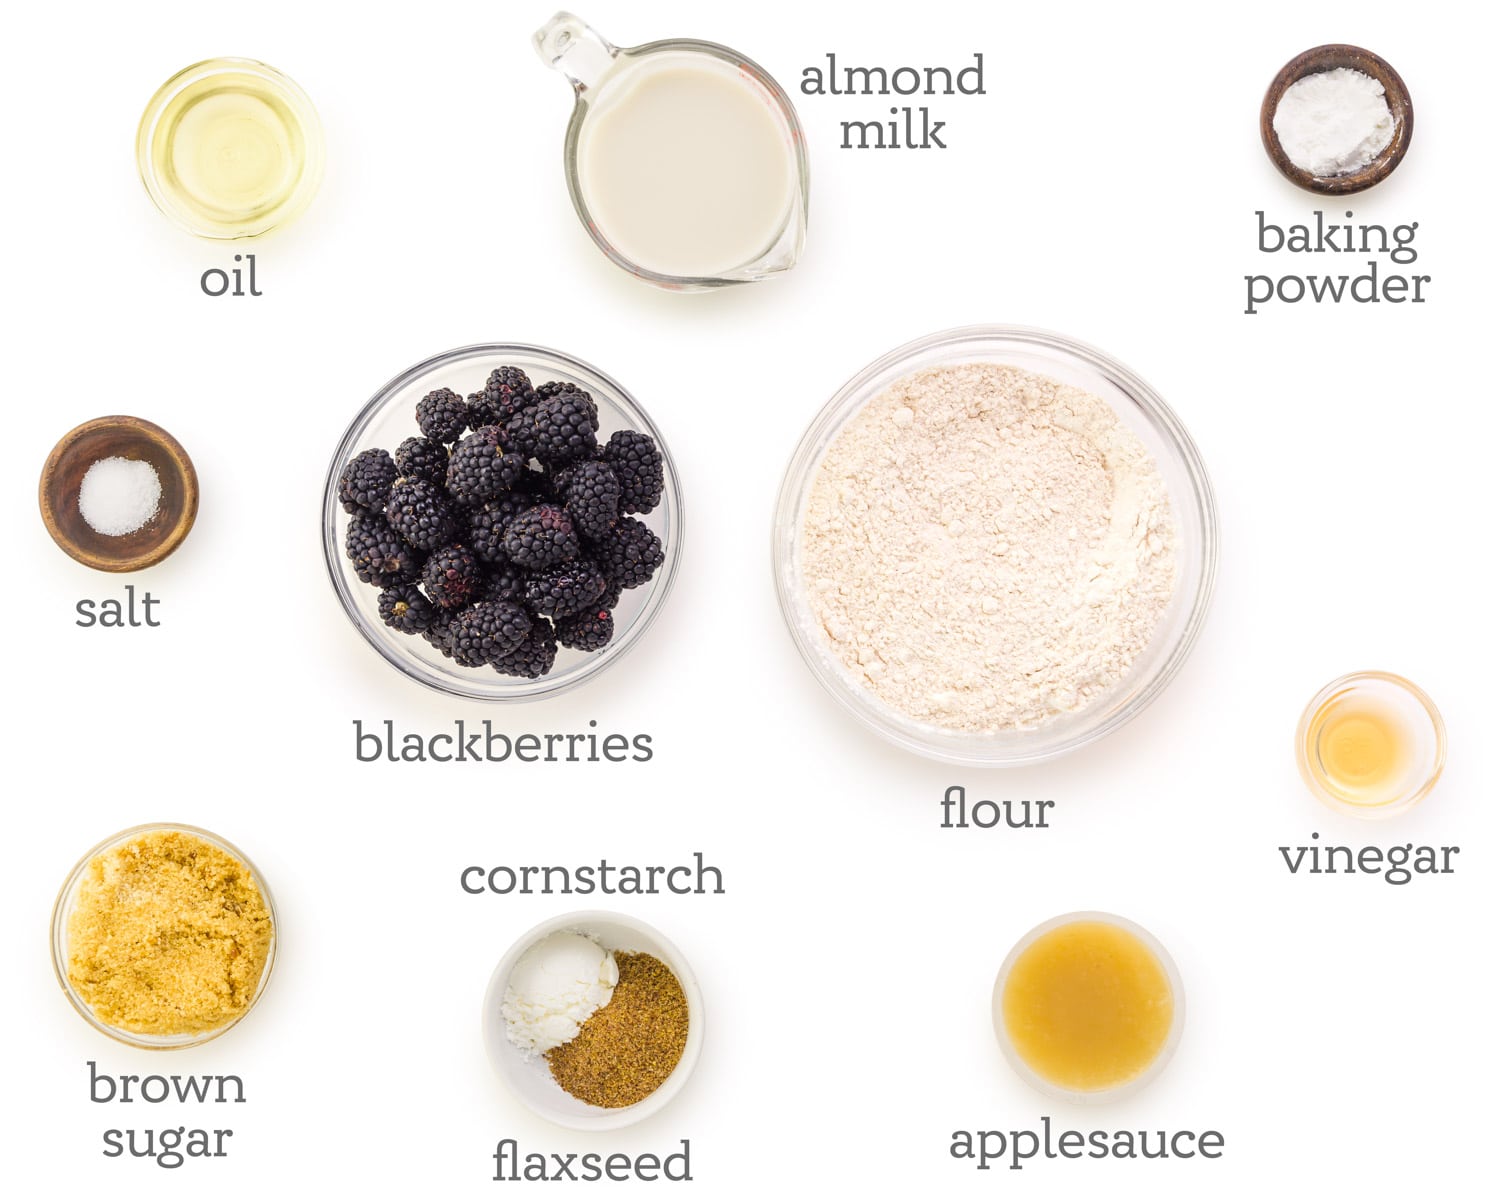 Ingredients are displayed on a white counter. The labels next to them read, baking powder, vinegar, flour, applesauce, flaxseed, cornstarch, brown sugar, blackberries, salt, oil, and almond milk.